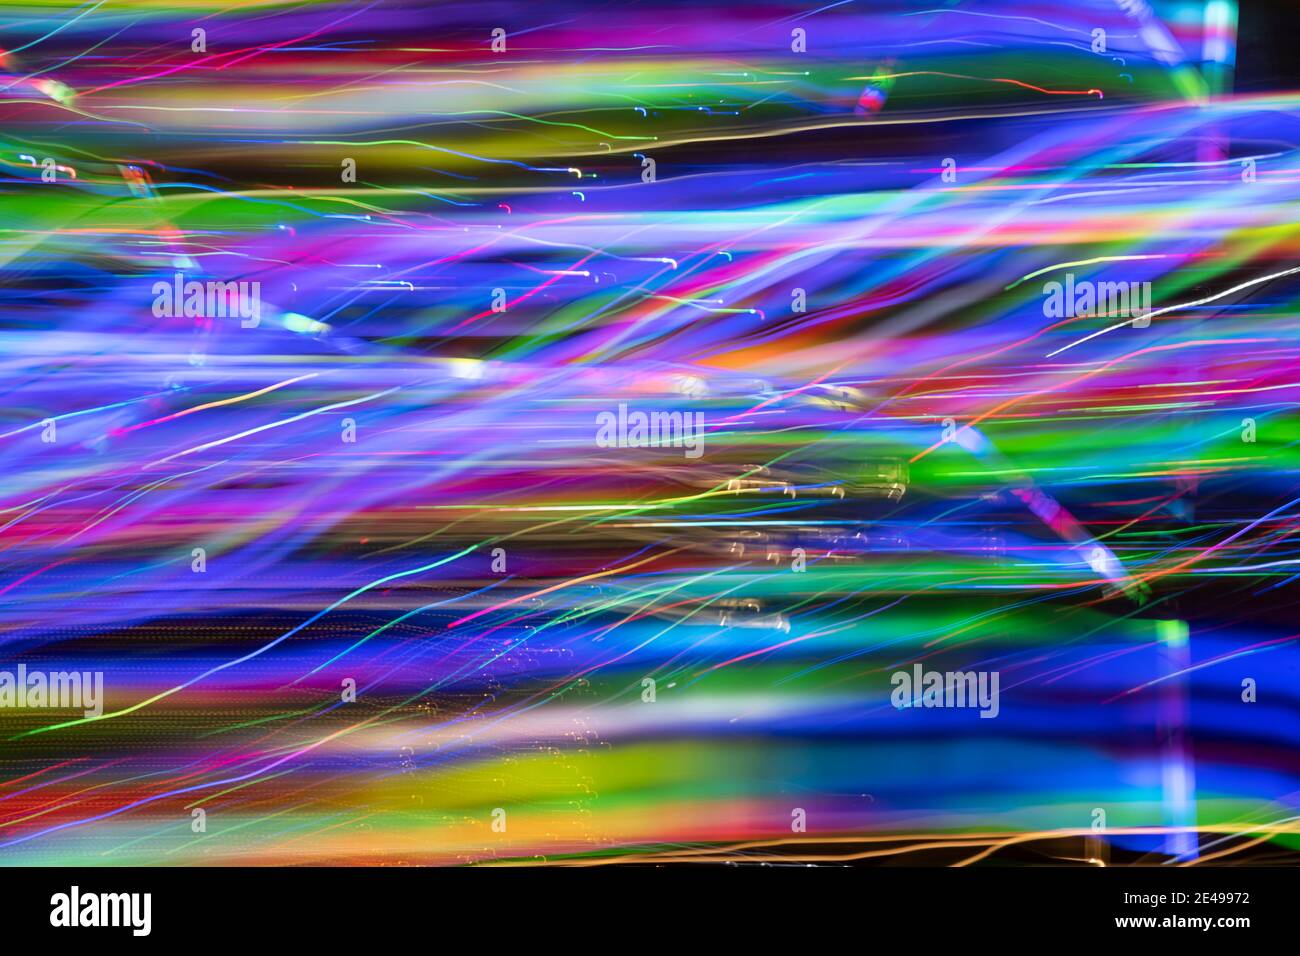 Abstract background of defocused swaths and squiggles of color created by LED lights photographed outdoors at night. Stock Photo